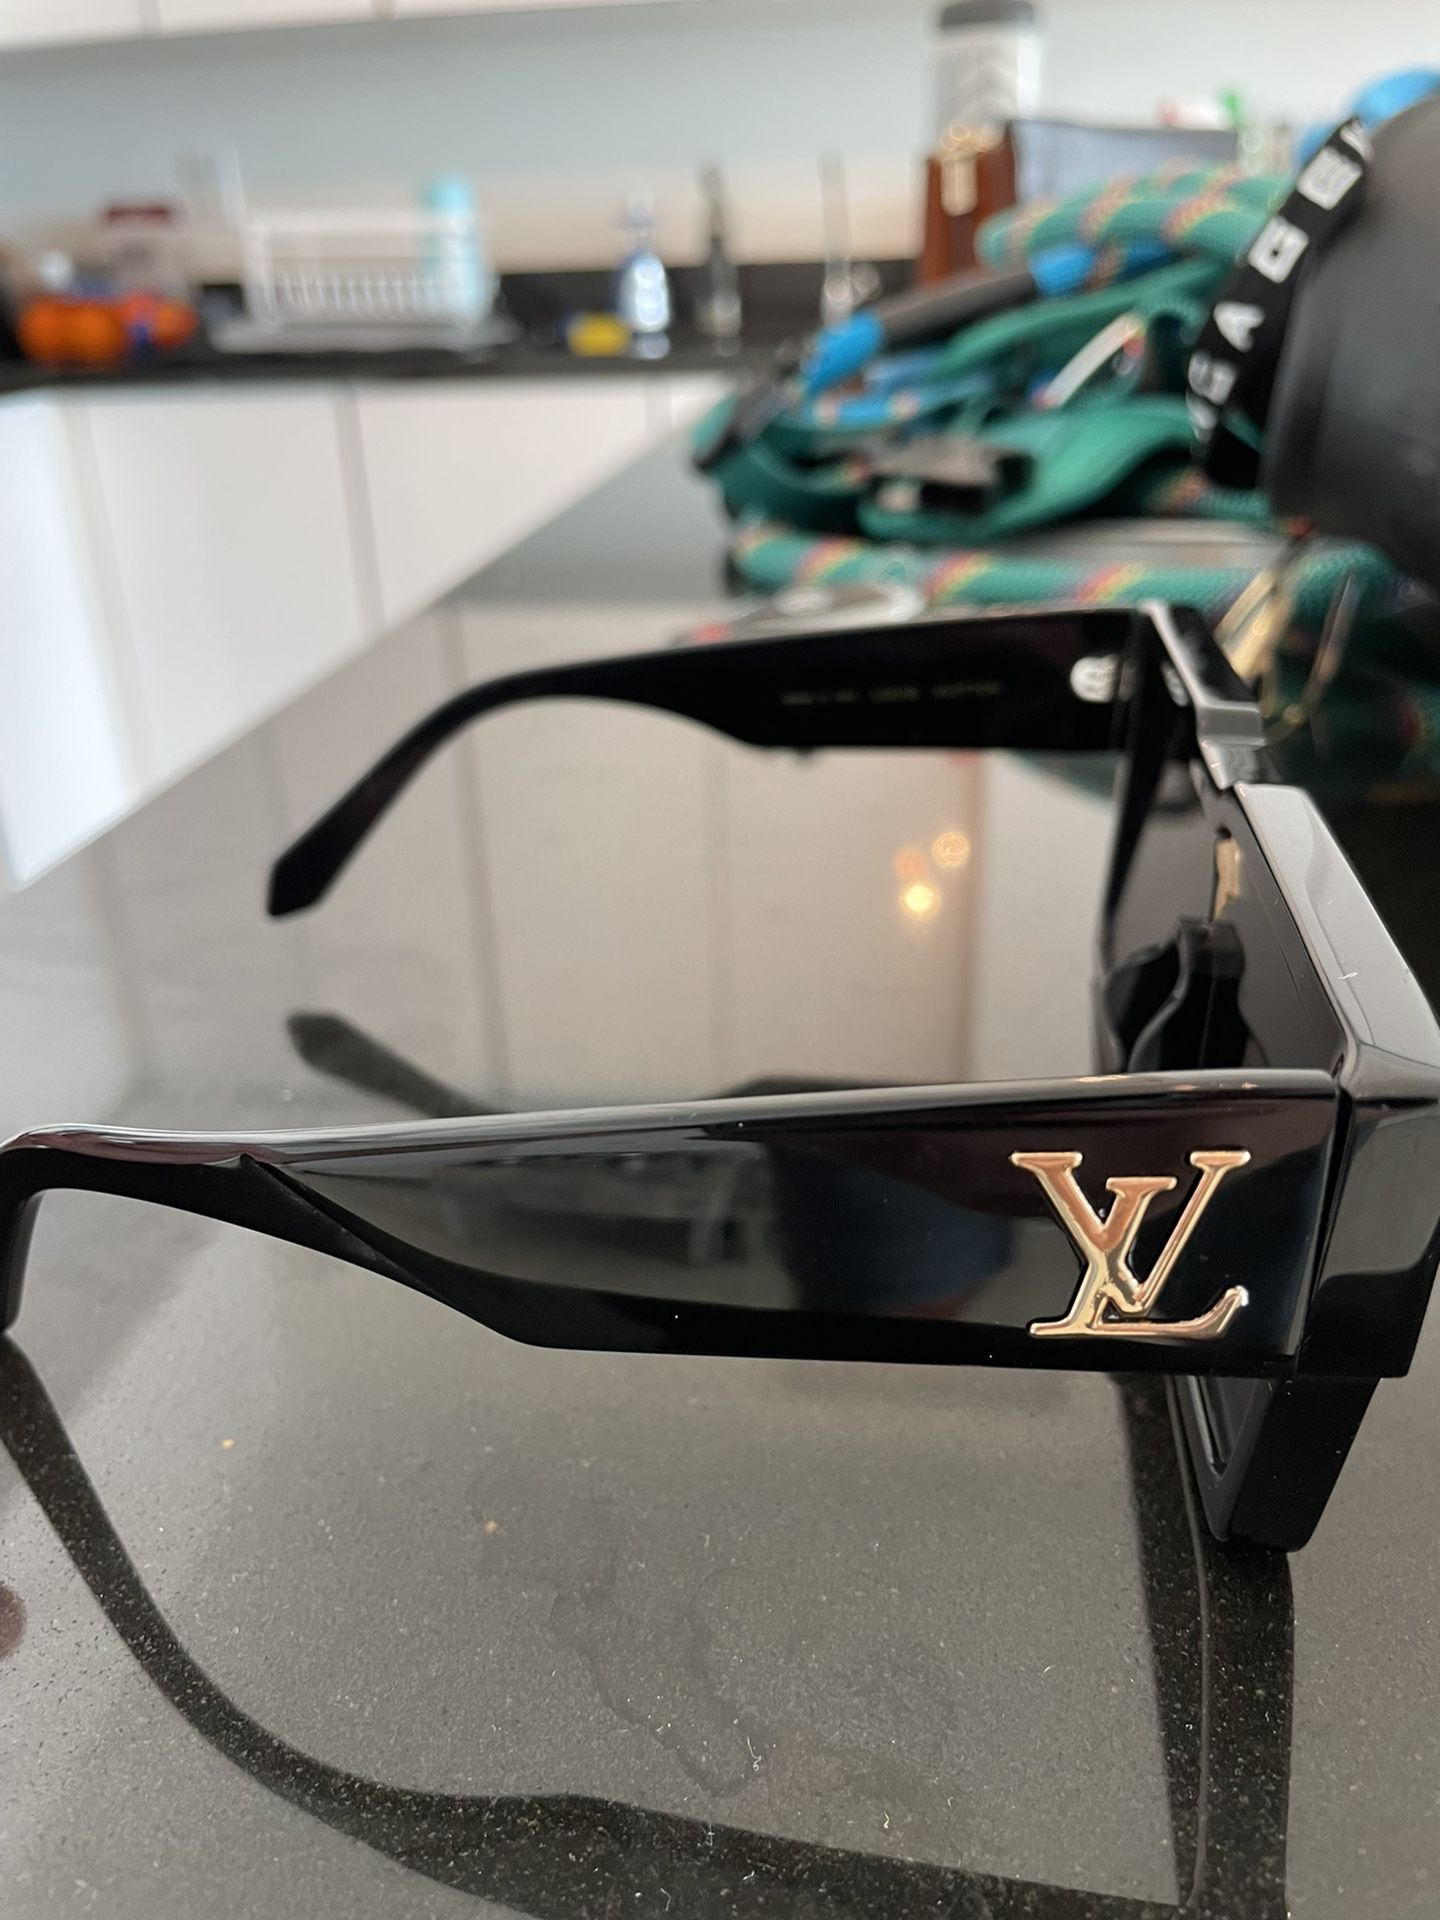 Louis Vuitton Cyclone Sunglasses for Sale in Los Angeles, CA - OfferUp